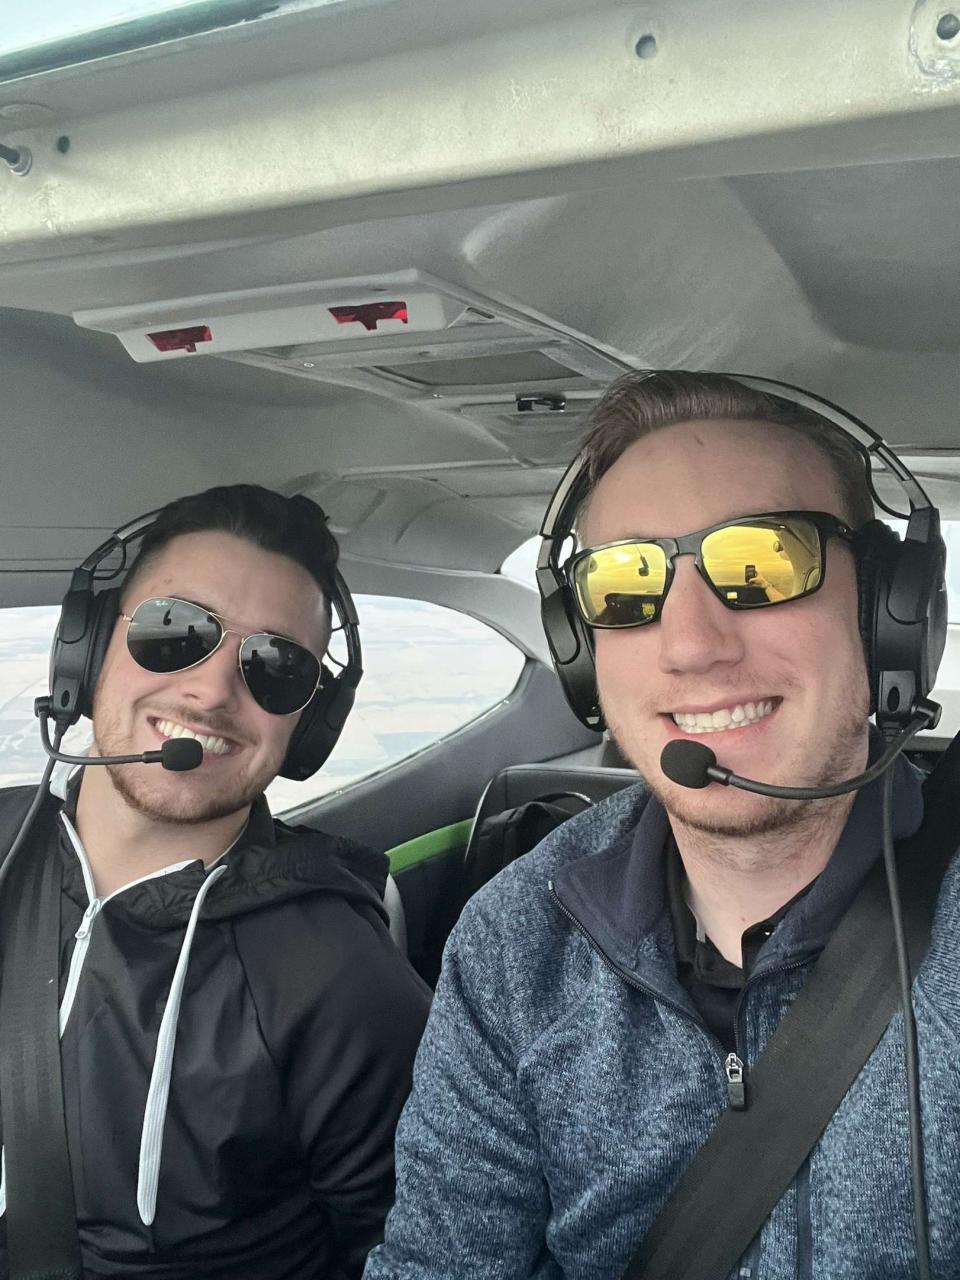 Former Garmin interns Ethan Stubbs (left) and AJ Luinstra (right) fly a plane. The two were hired full time by Garmin following their internships.